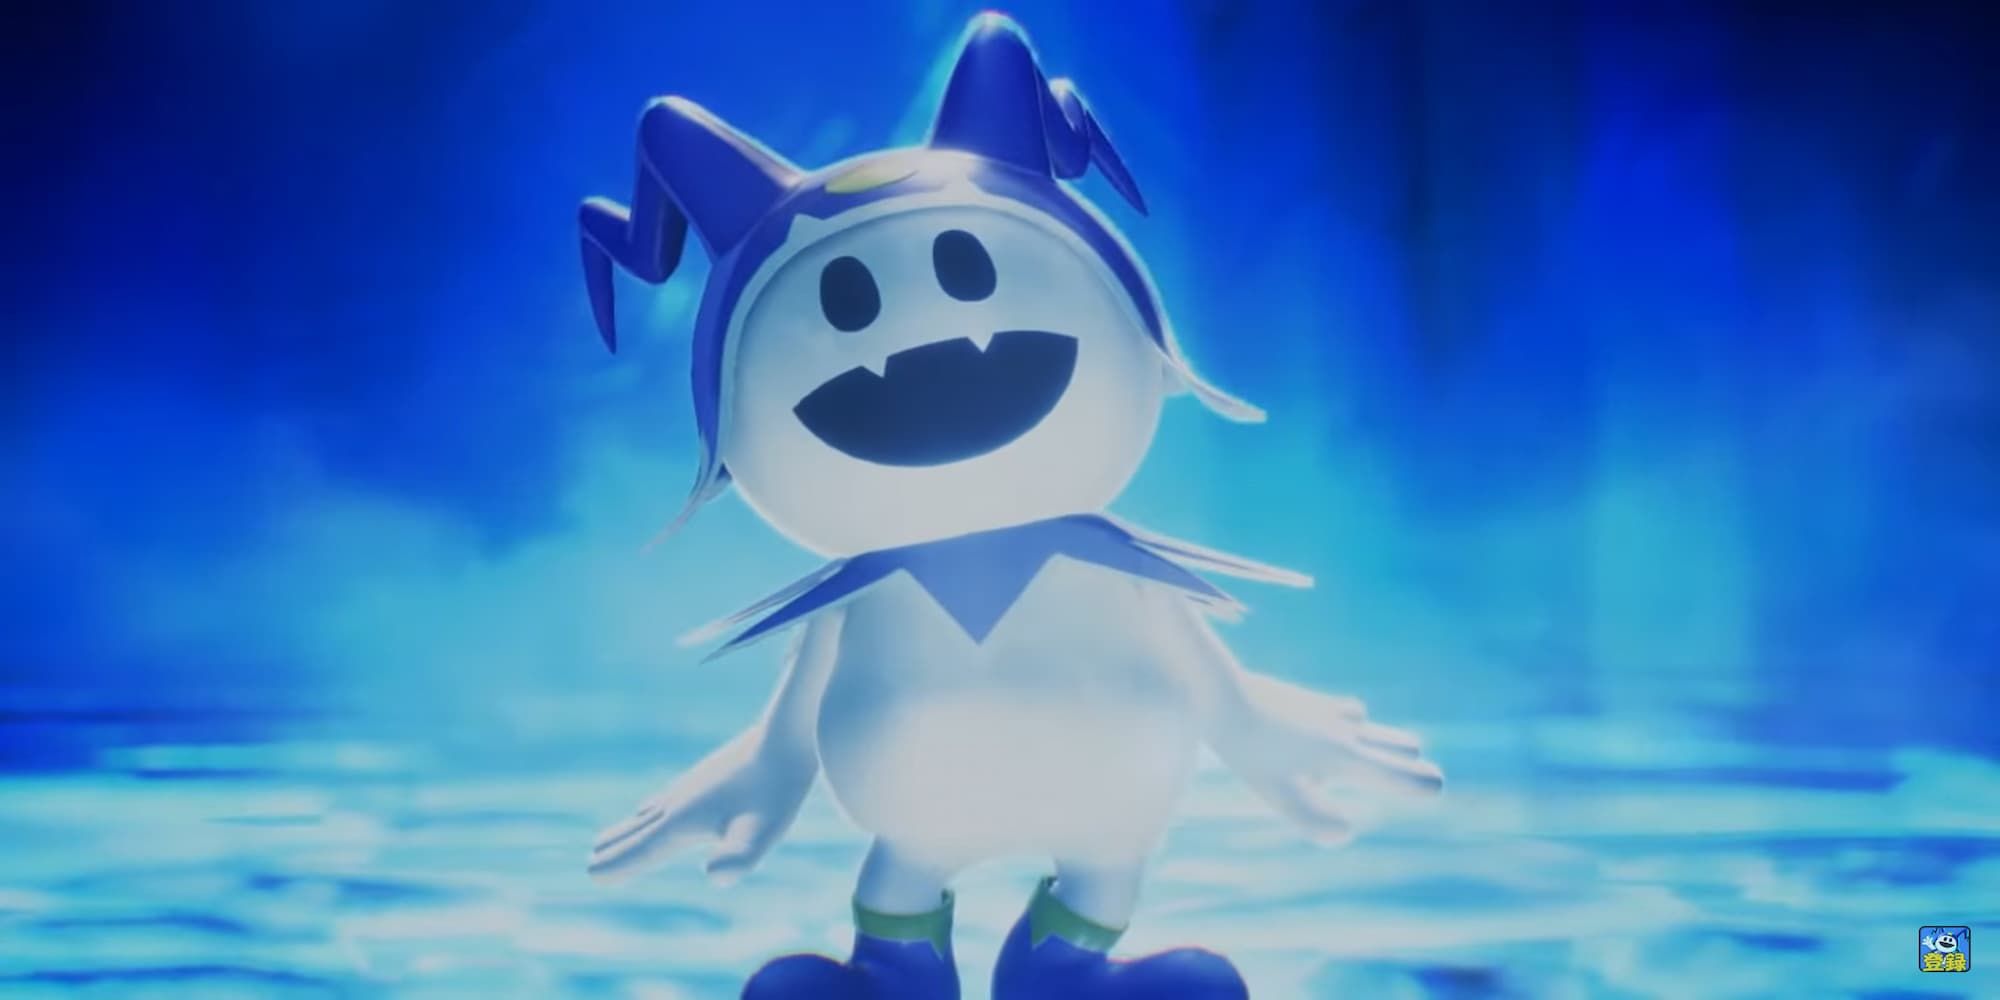 Jack Frost from Shin Megami Tensei 5 against a blue background a small snowman with black eyes large black mouth and blue hat and boots